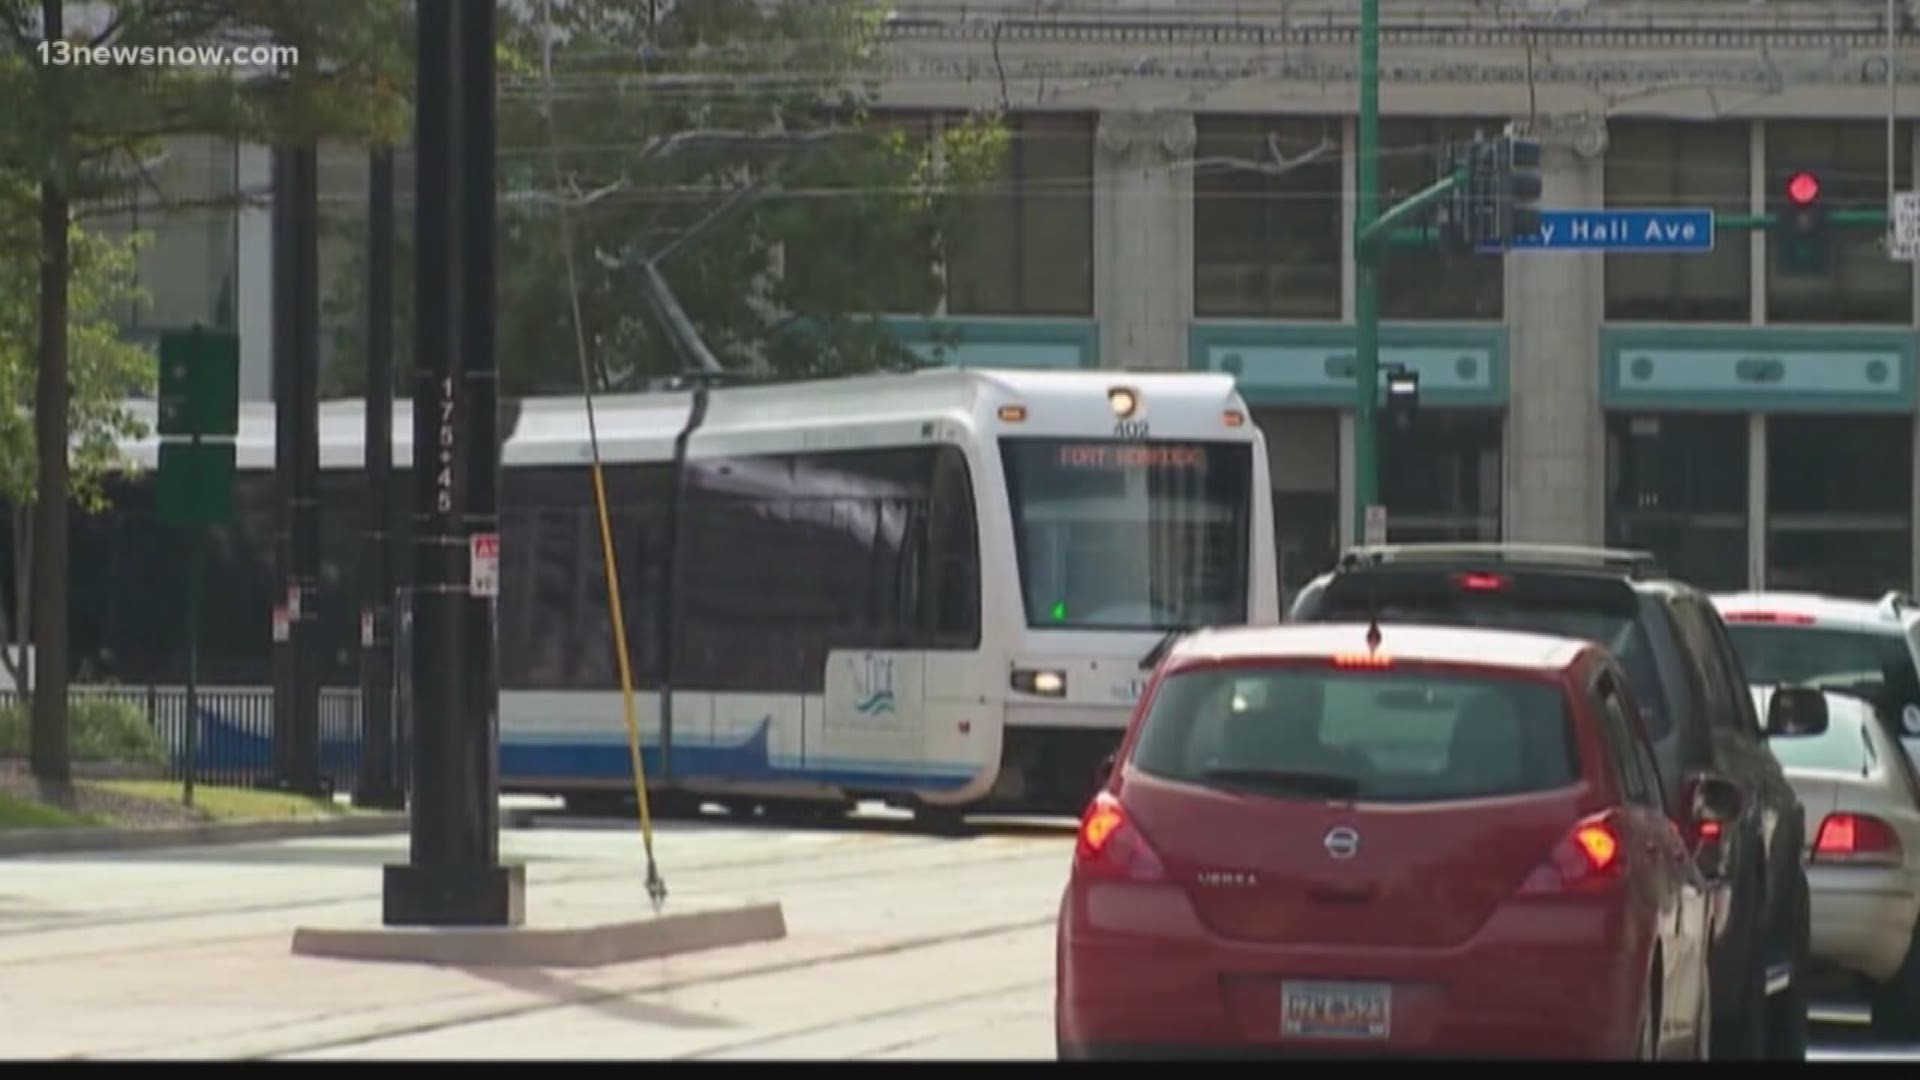 A plan to extend light rail on Norfolk's west side is stalled.